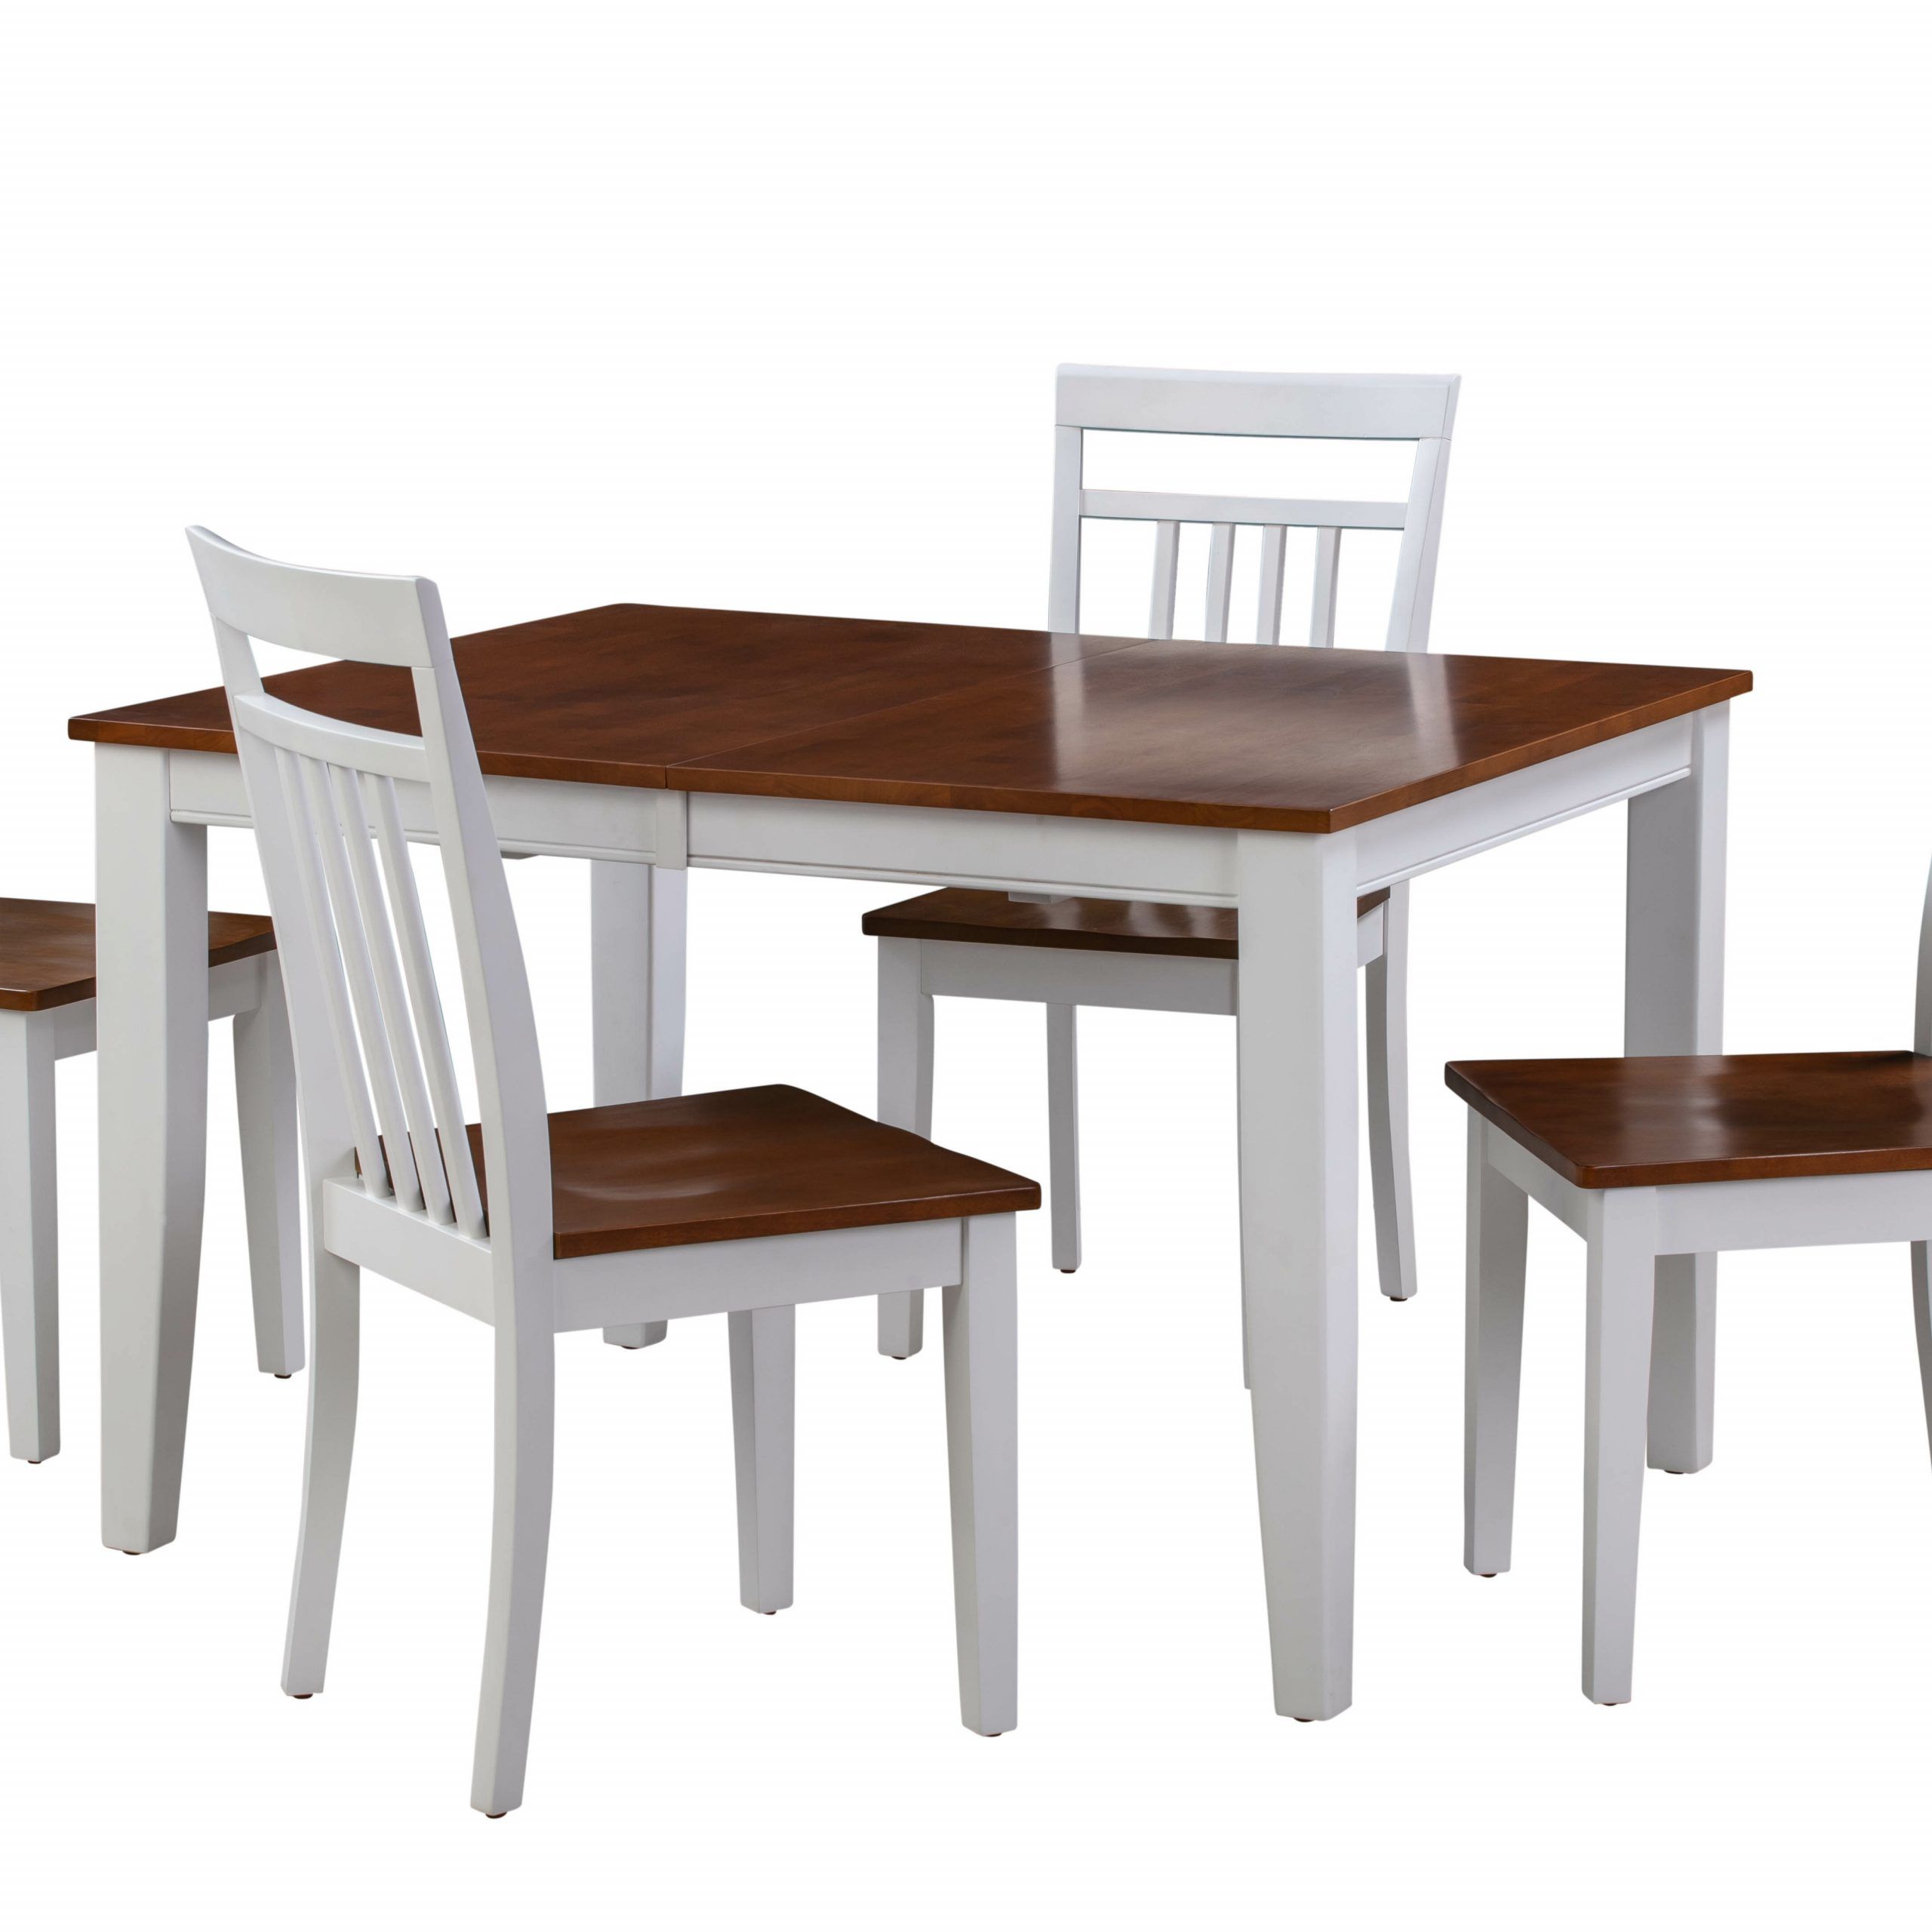 Rustic Brown Lorraine Extending Dining Tables Regarding Most Recent Leisa 5 Piece Solid Wood Dining Set (View 16 of 25)